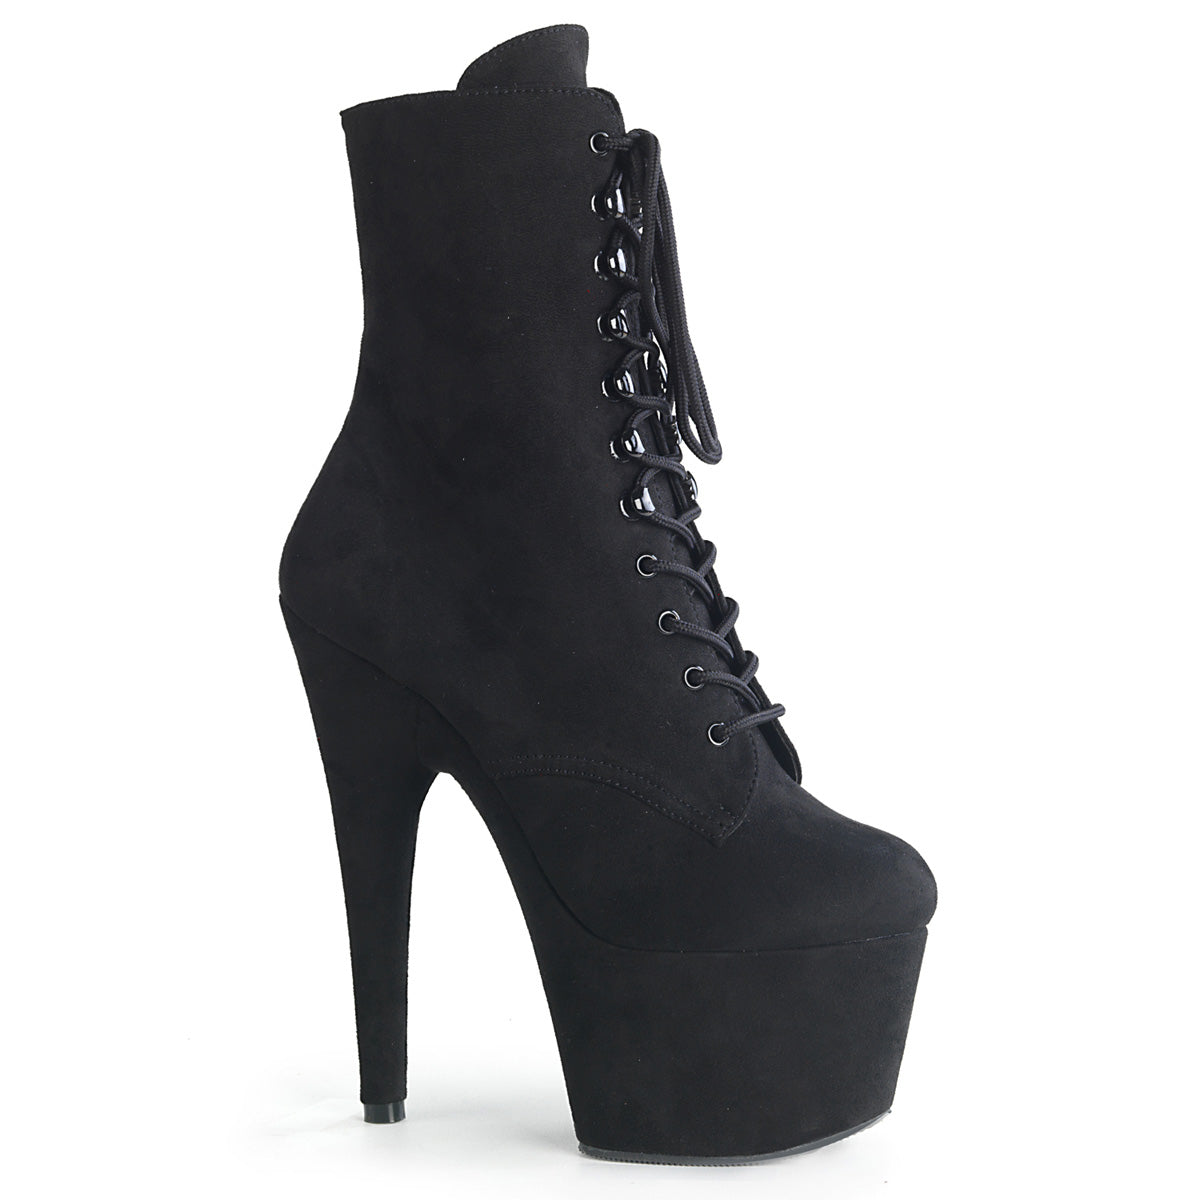 ADORE-1020FS Pleasers 7" Heel Black Exotic Dancing Ankle Boot